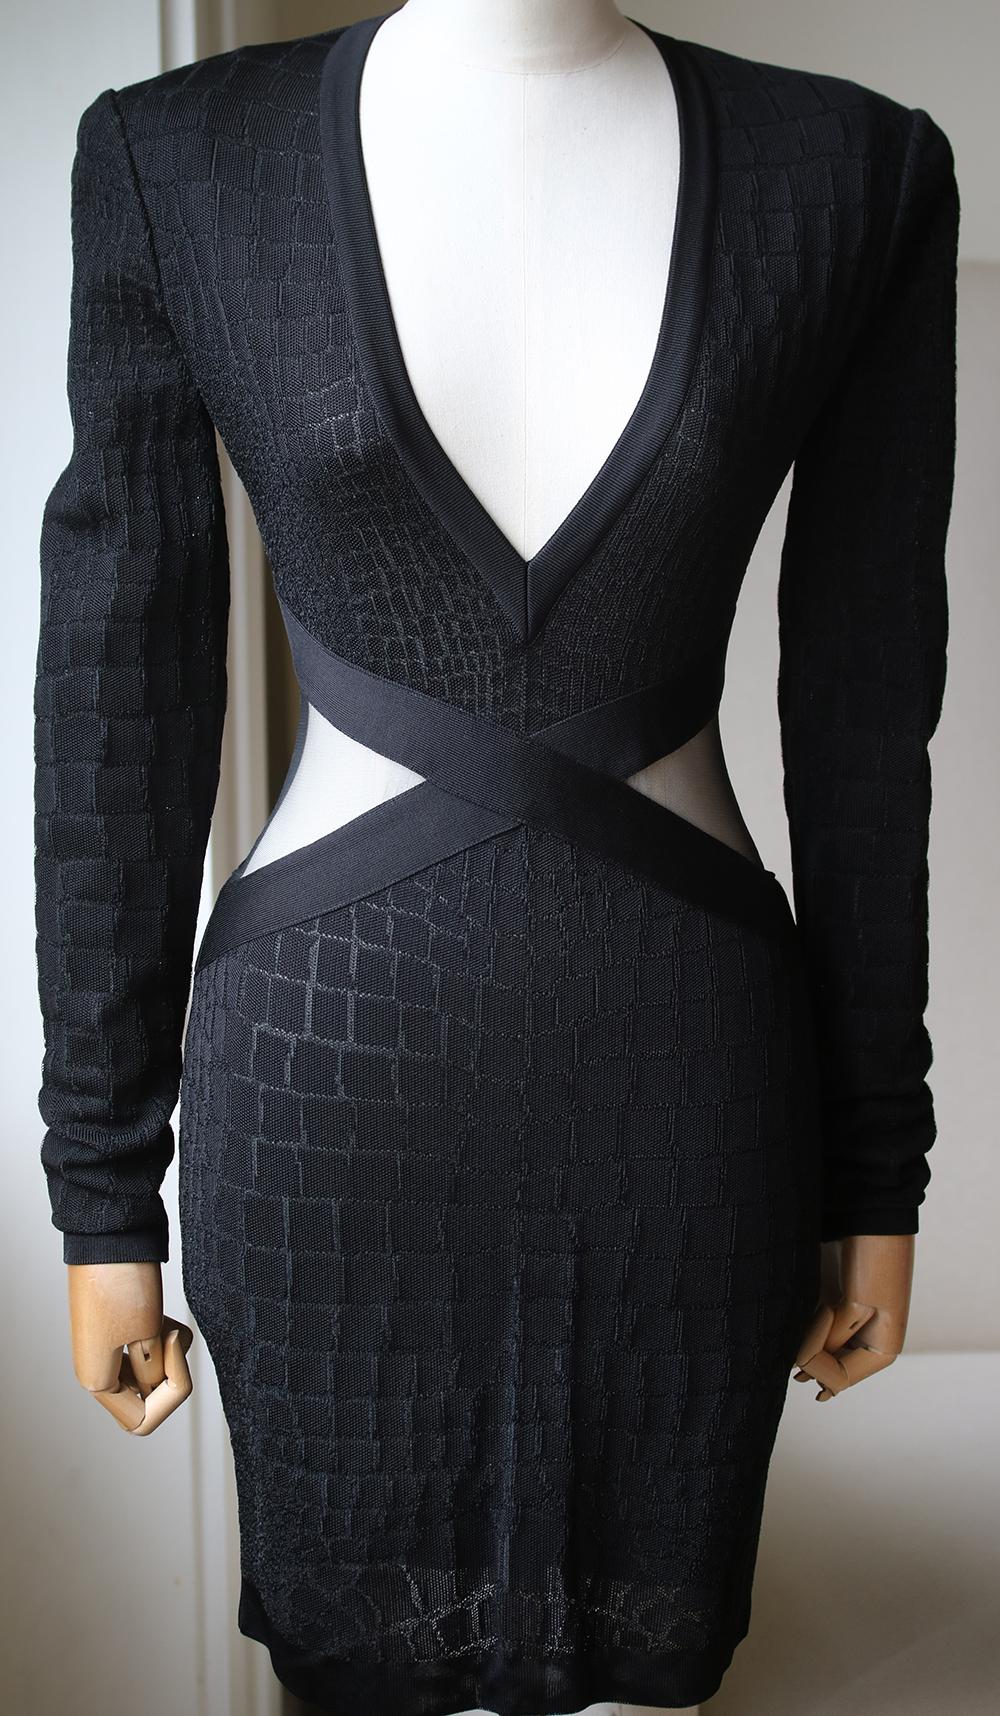 Balmain's dress is made from stretch-knit that's woven with a tactile croc-effect finish. Designed to create an hourglass shape, this sculpting piece has structured, padded shoulders and mesh panels that wrap around the narrowest part of your waist.